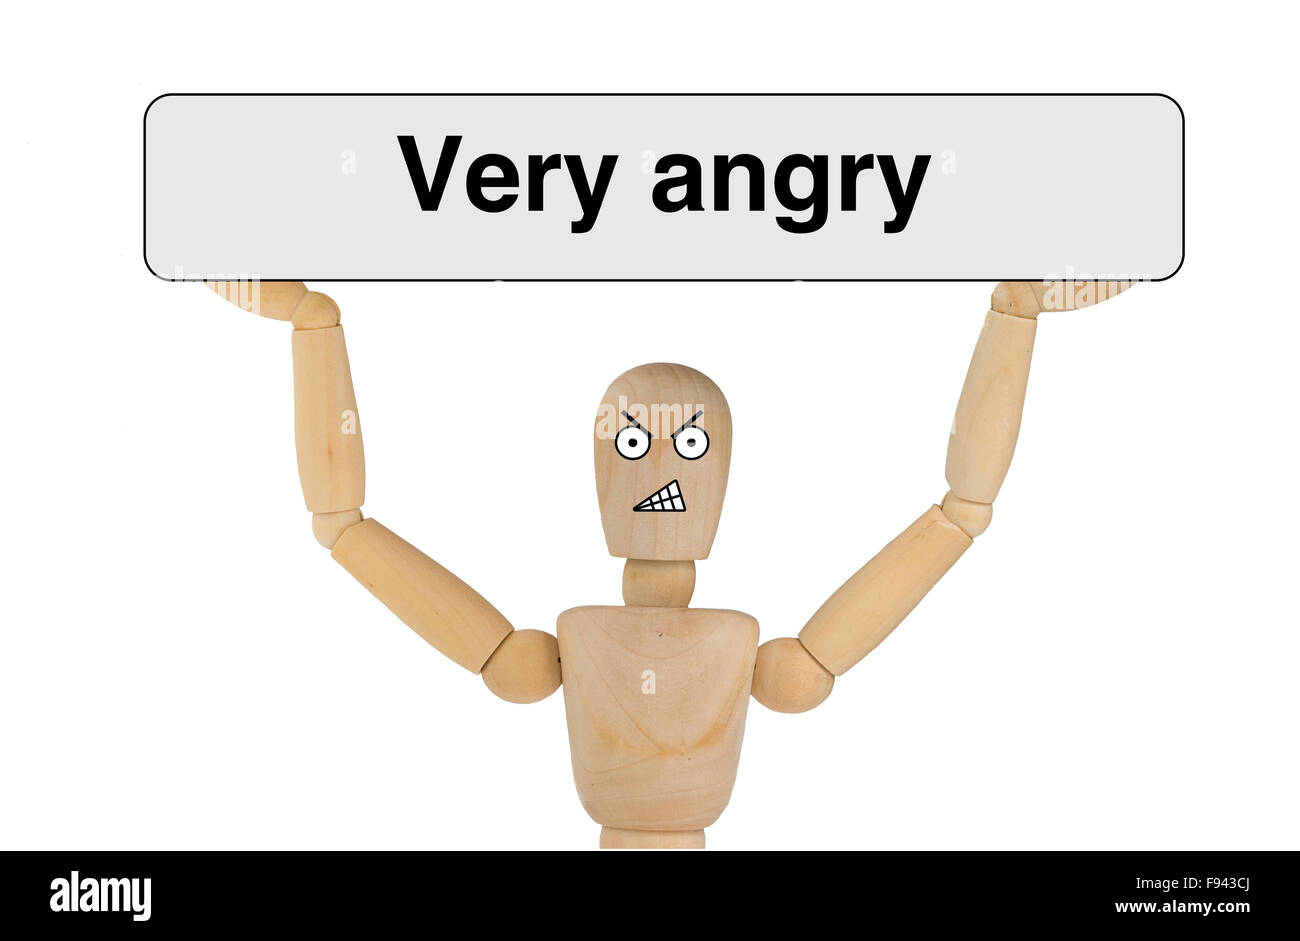 Puppet with very angry face holding a sign to explain the expression Stock Photo